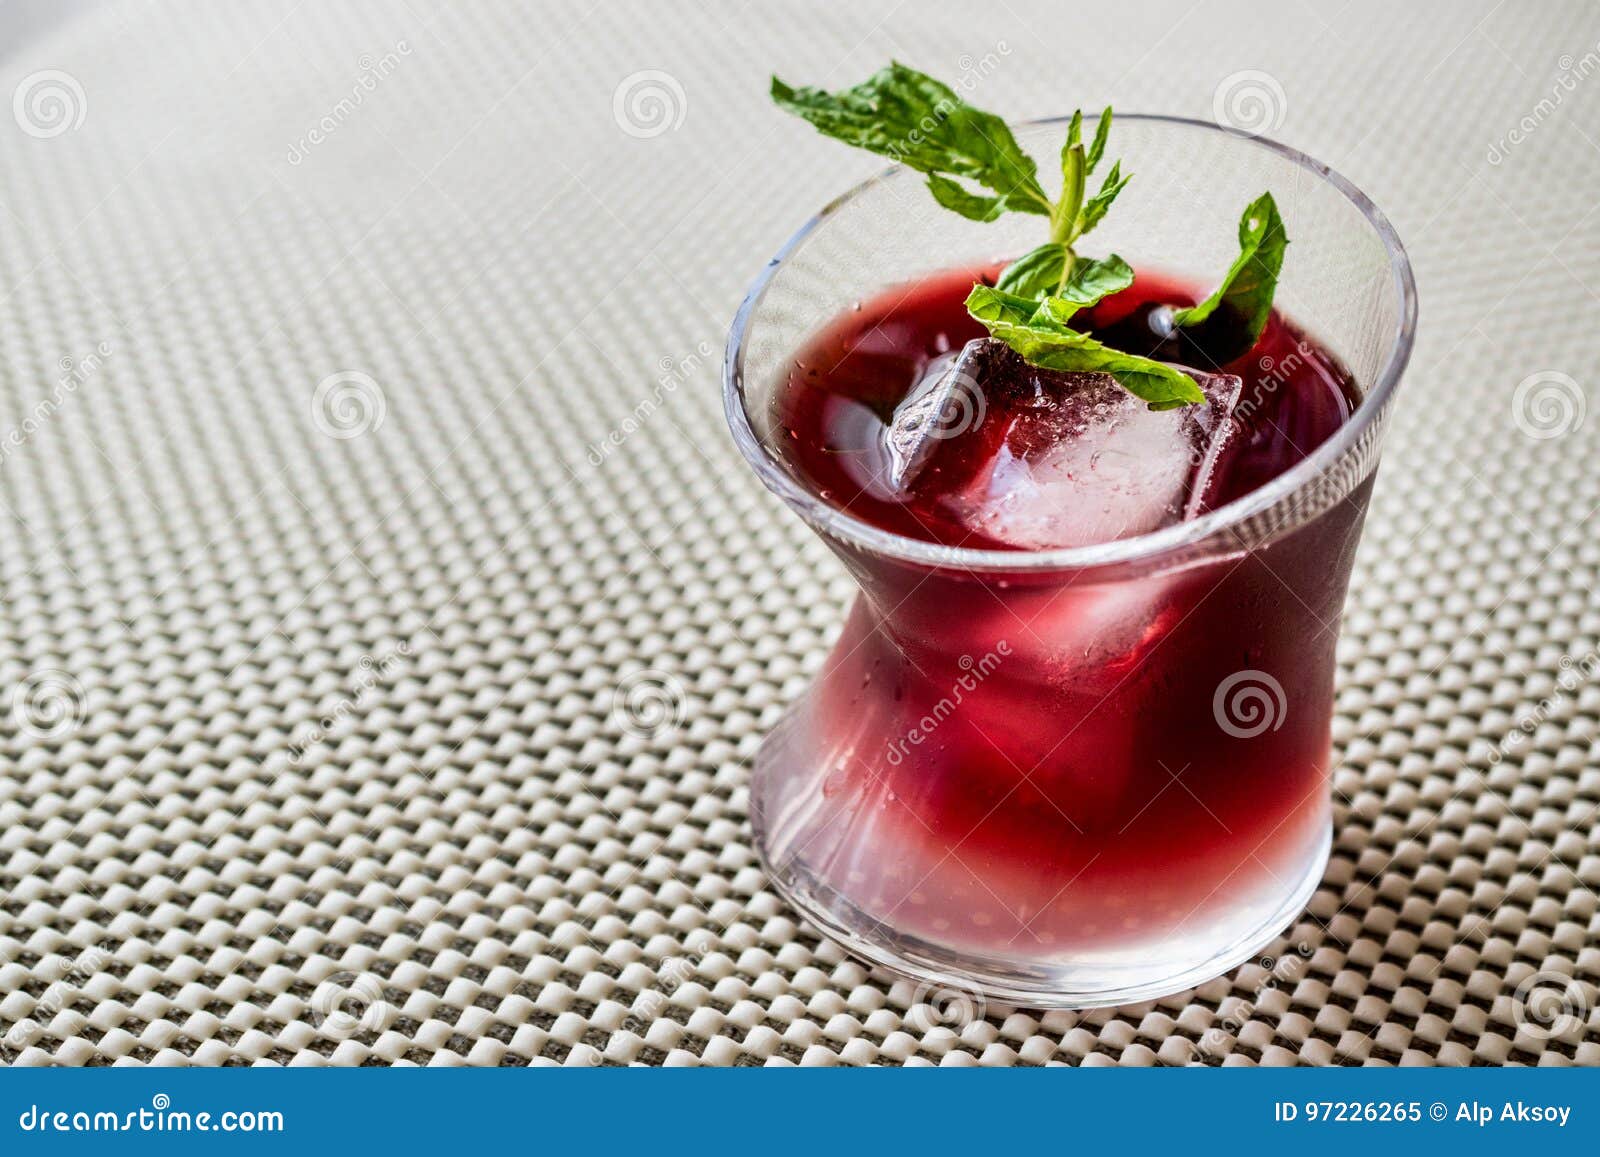 Malibu Sunset Cocktail With Mint Leaves. Stock Image ...